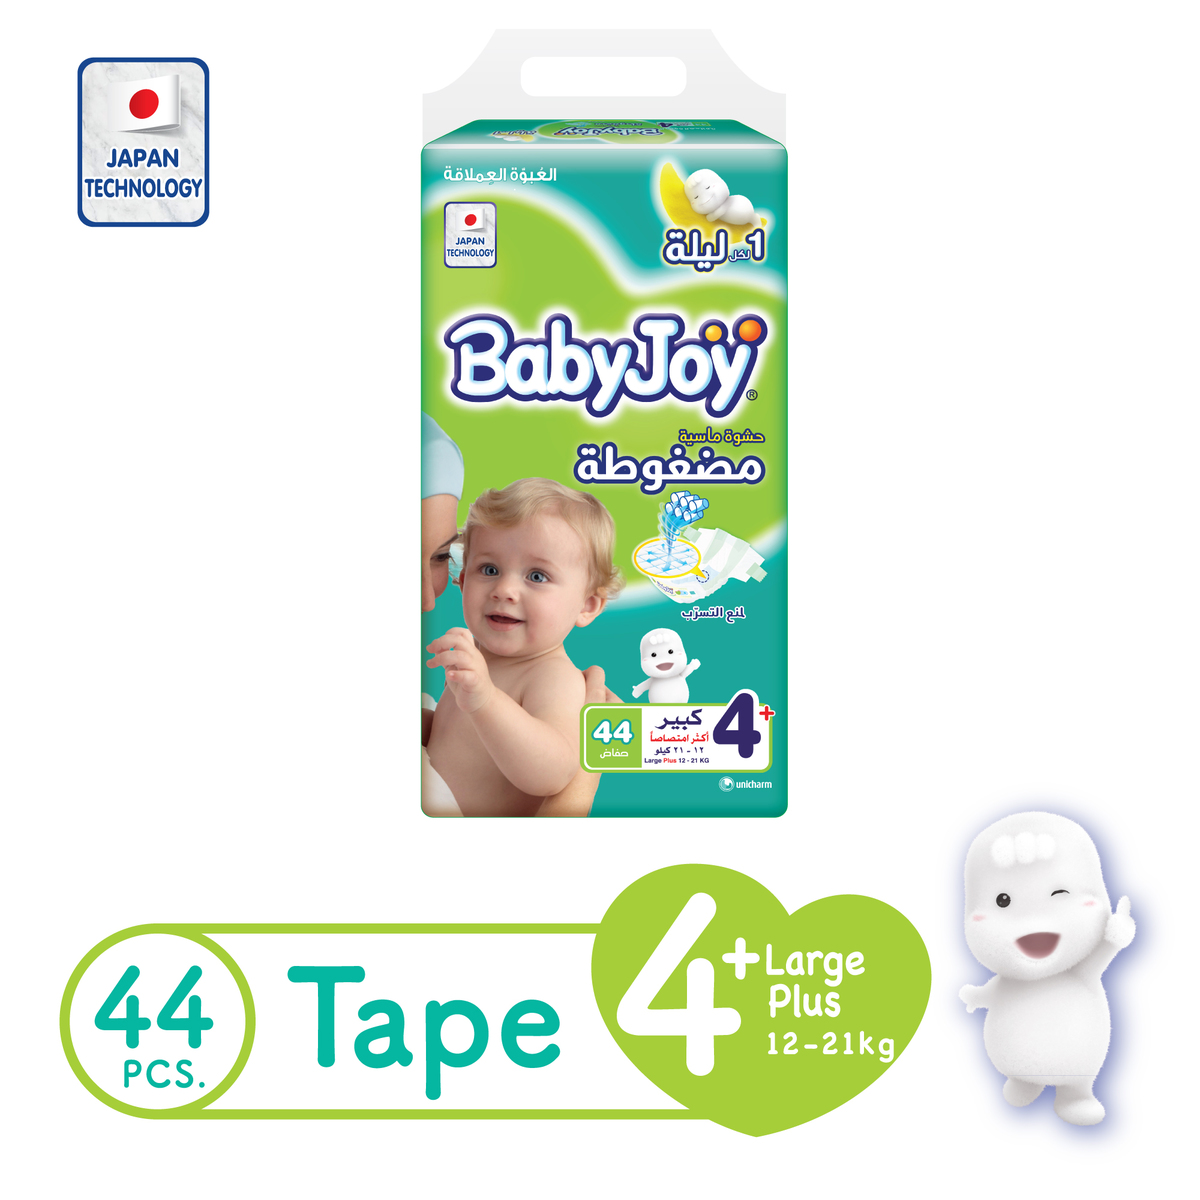 BabyJoy Compressed Tape Diaper Size 4+ Large Plus Jumbo Pack 12-21kg 44 Count